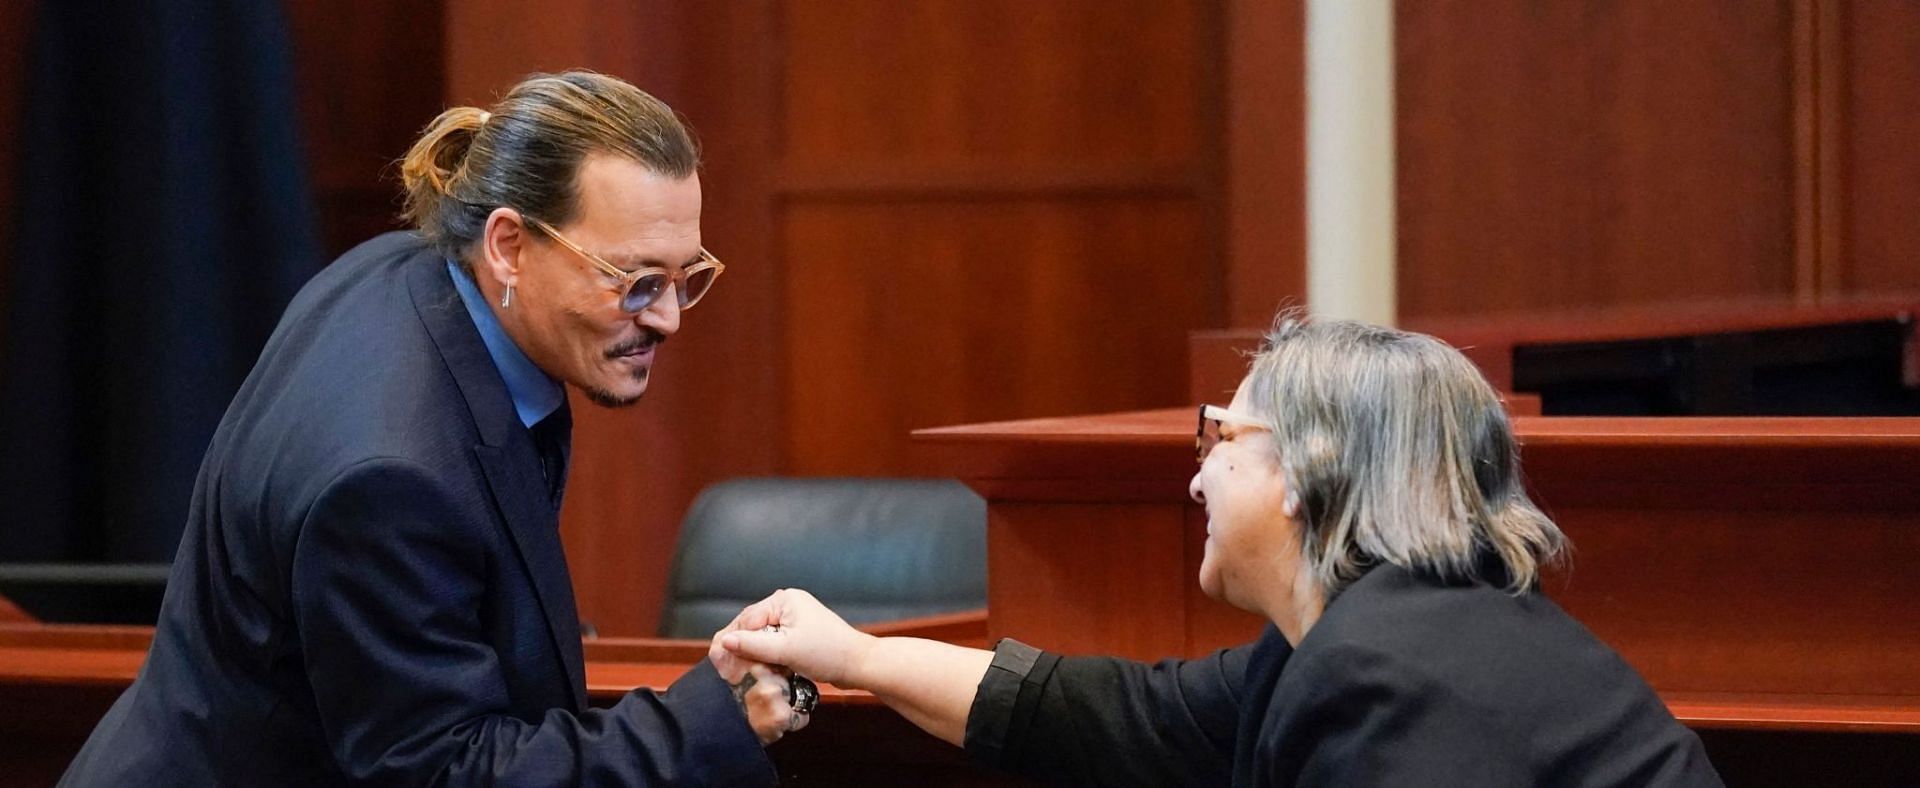 Johnny Depp and Stenographer Judy&#039;s moments wins hearts online (Image via Getty Images)